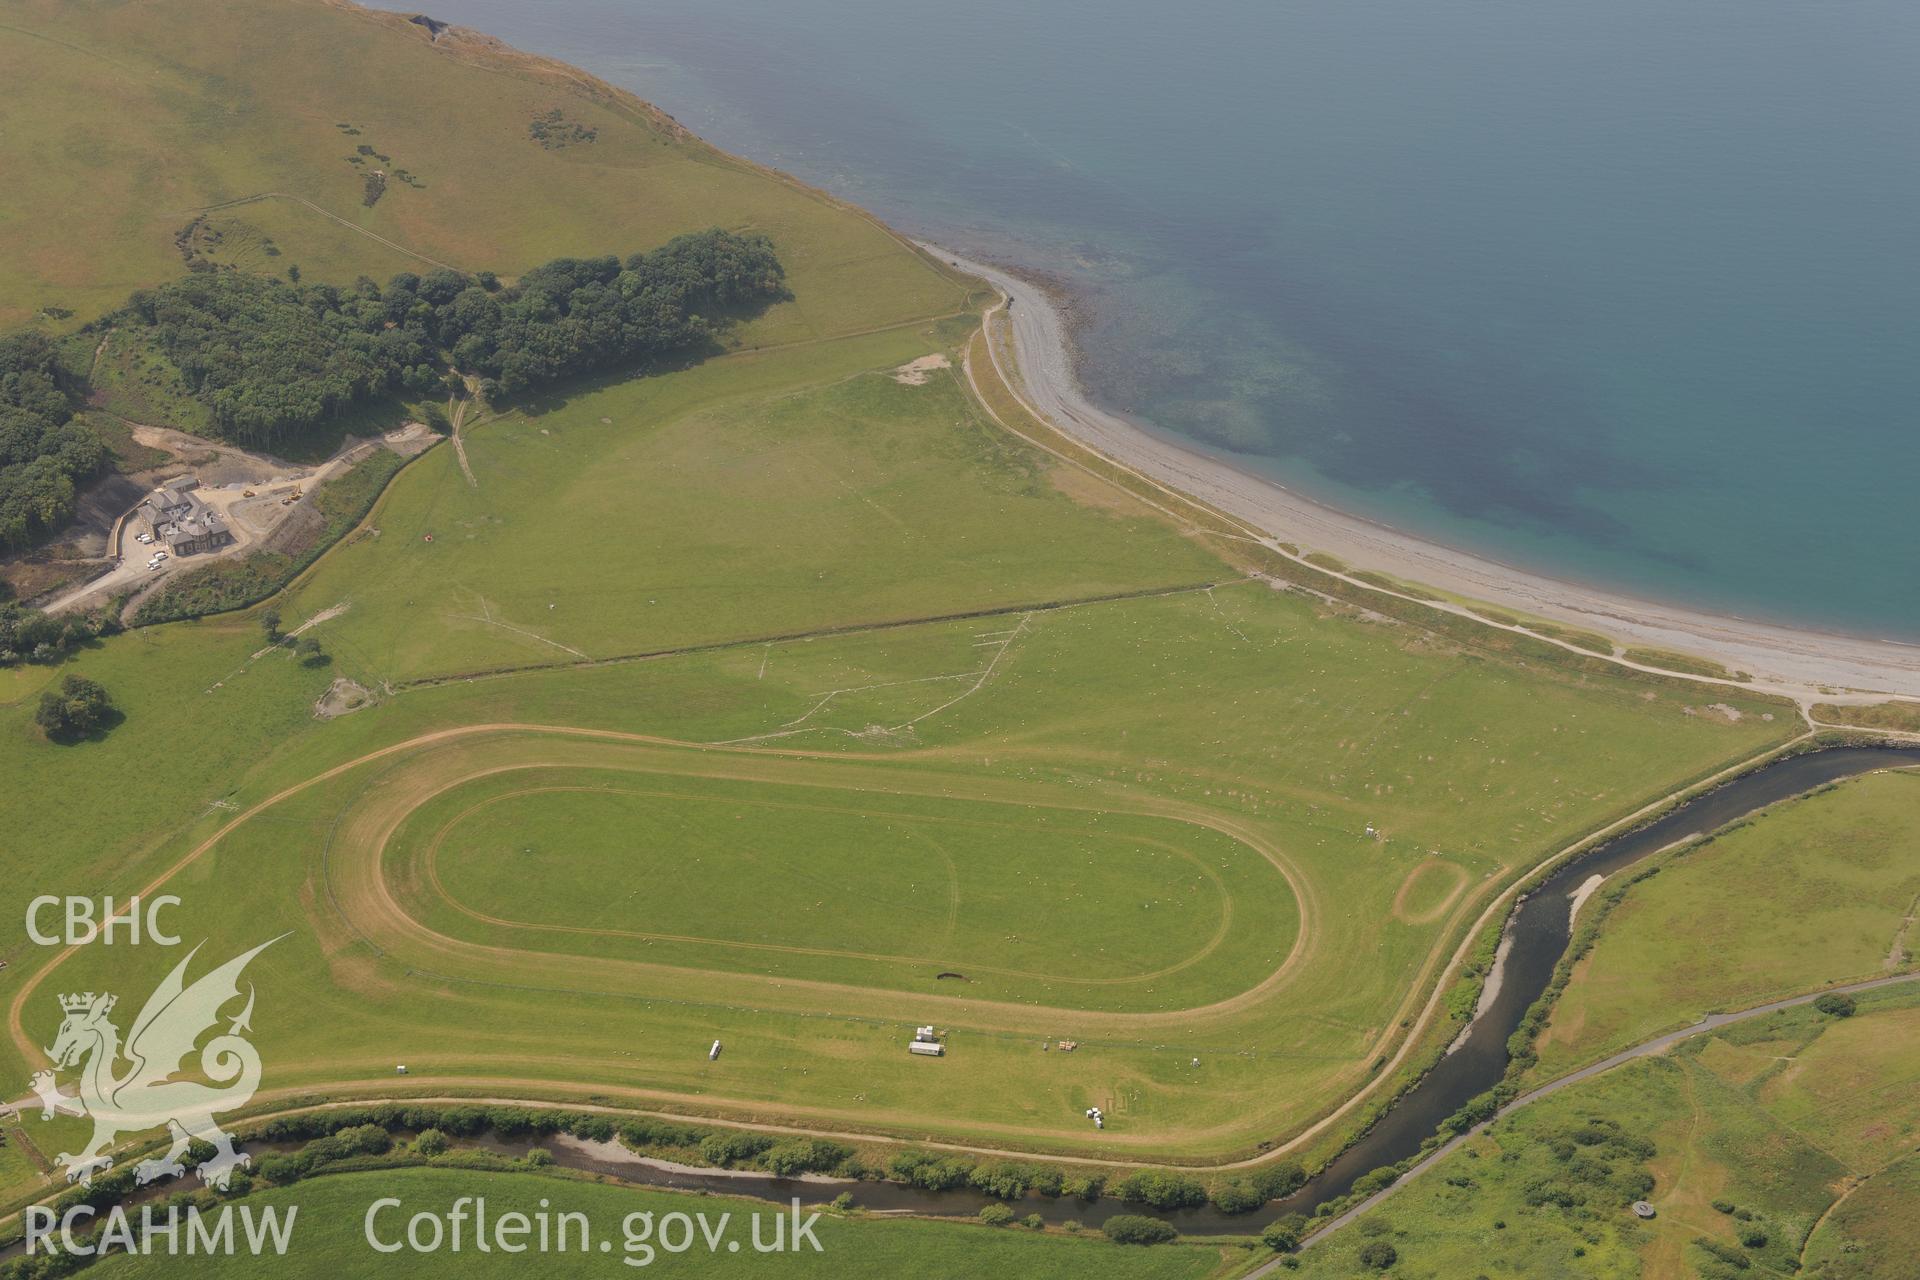 Ceredigion Trotting Circuit at Tan y Castell and Plas Tanybwlch, Aberystwyth. Oblique aerial photograph taken during the Royal Commission?s programme of archaeological aerial reconnaissance by Toby Driver on 12th July 2013.